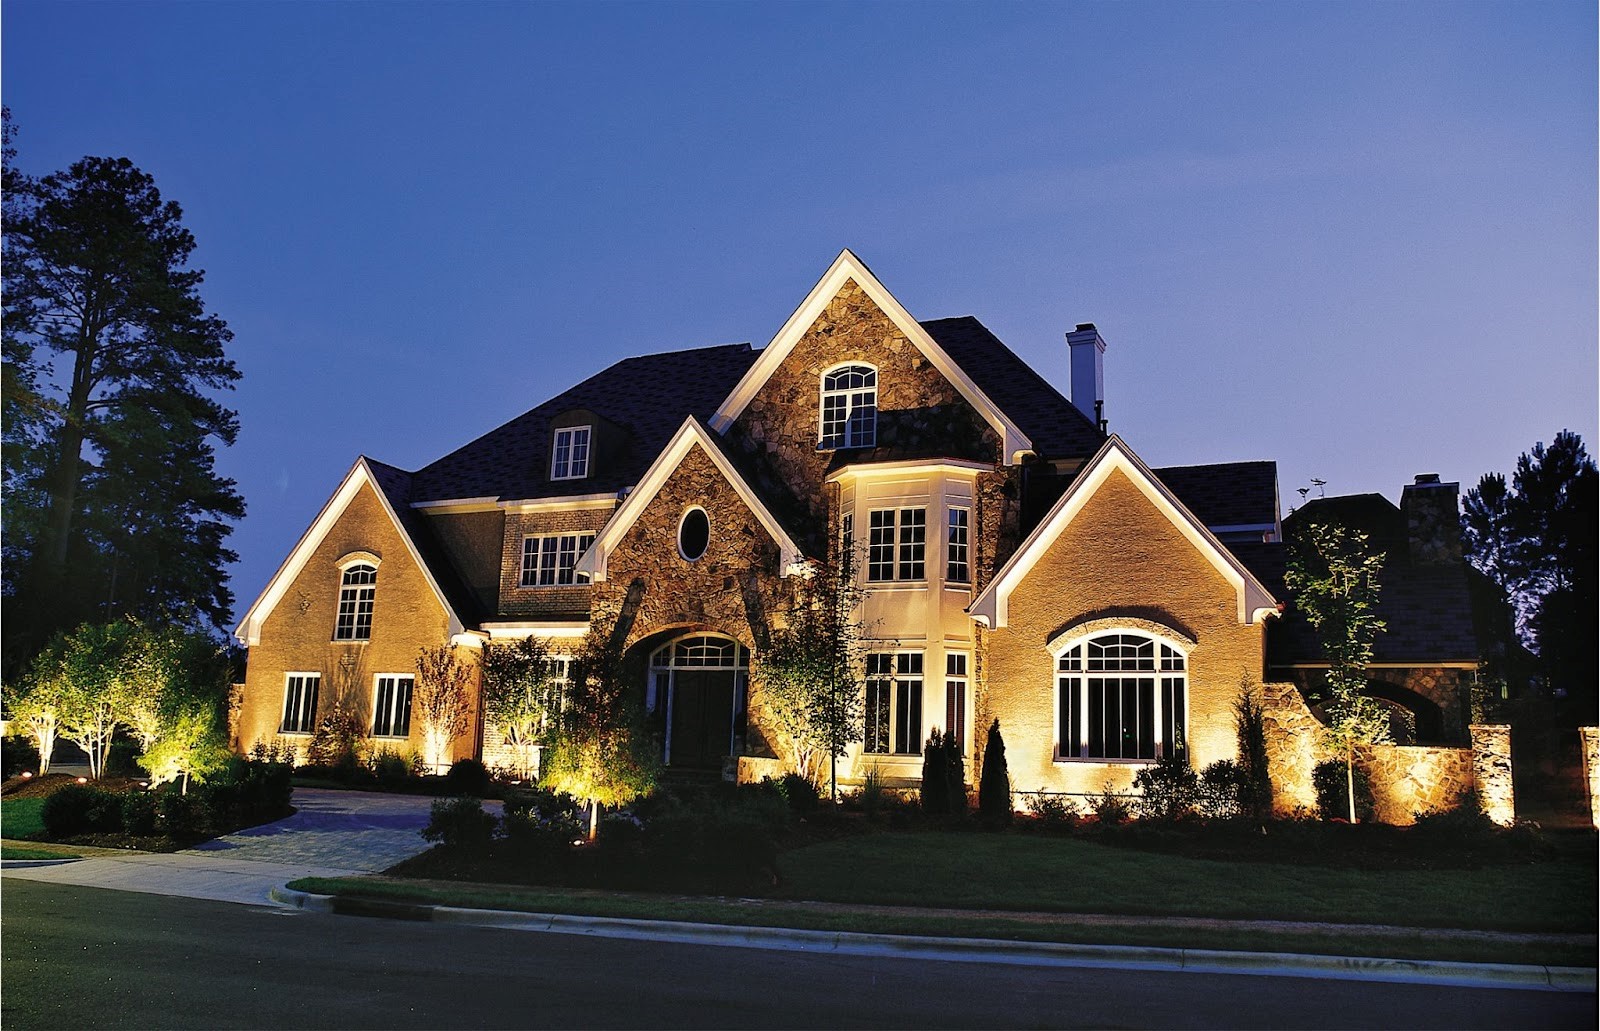 Landscape Lighting Used To Brighten Trees, Gardens, Pathways, and Front Facade of Home